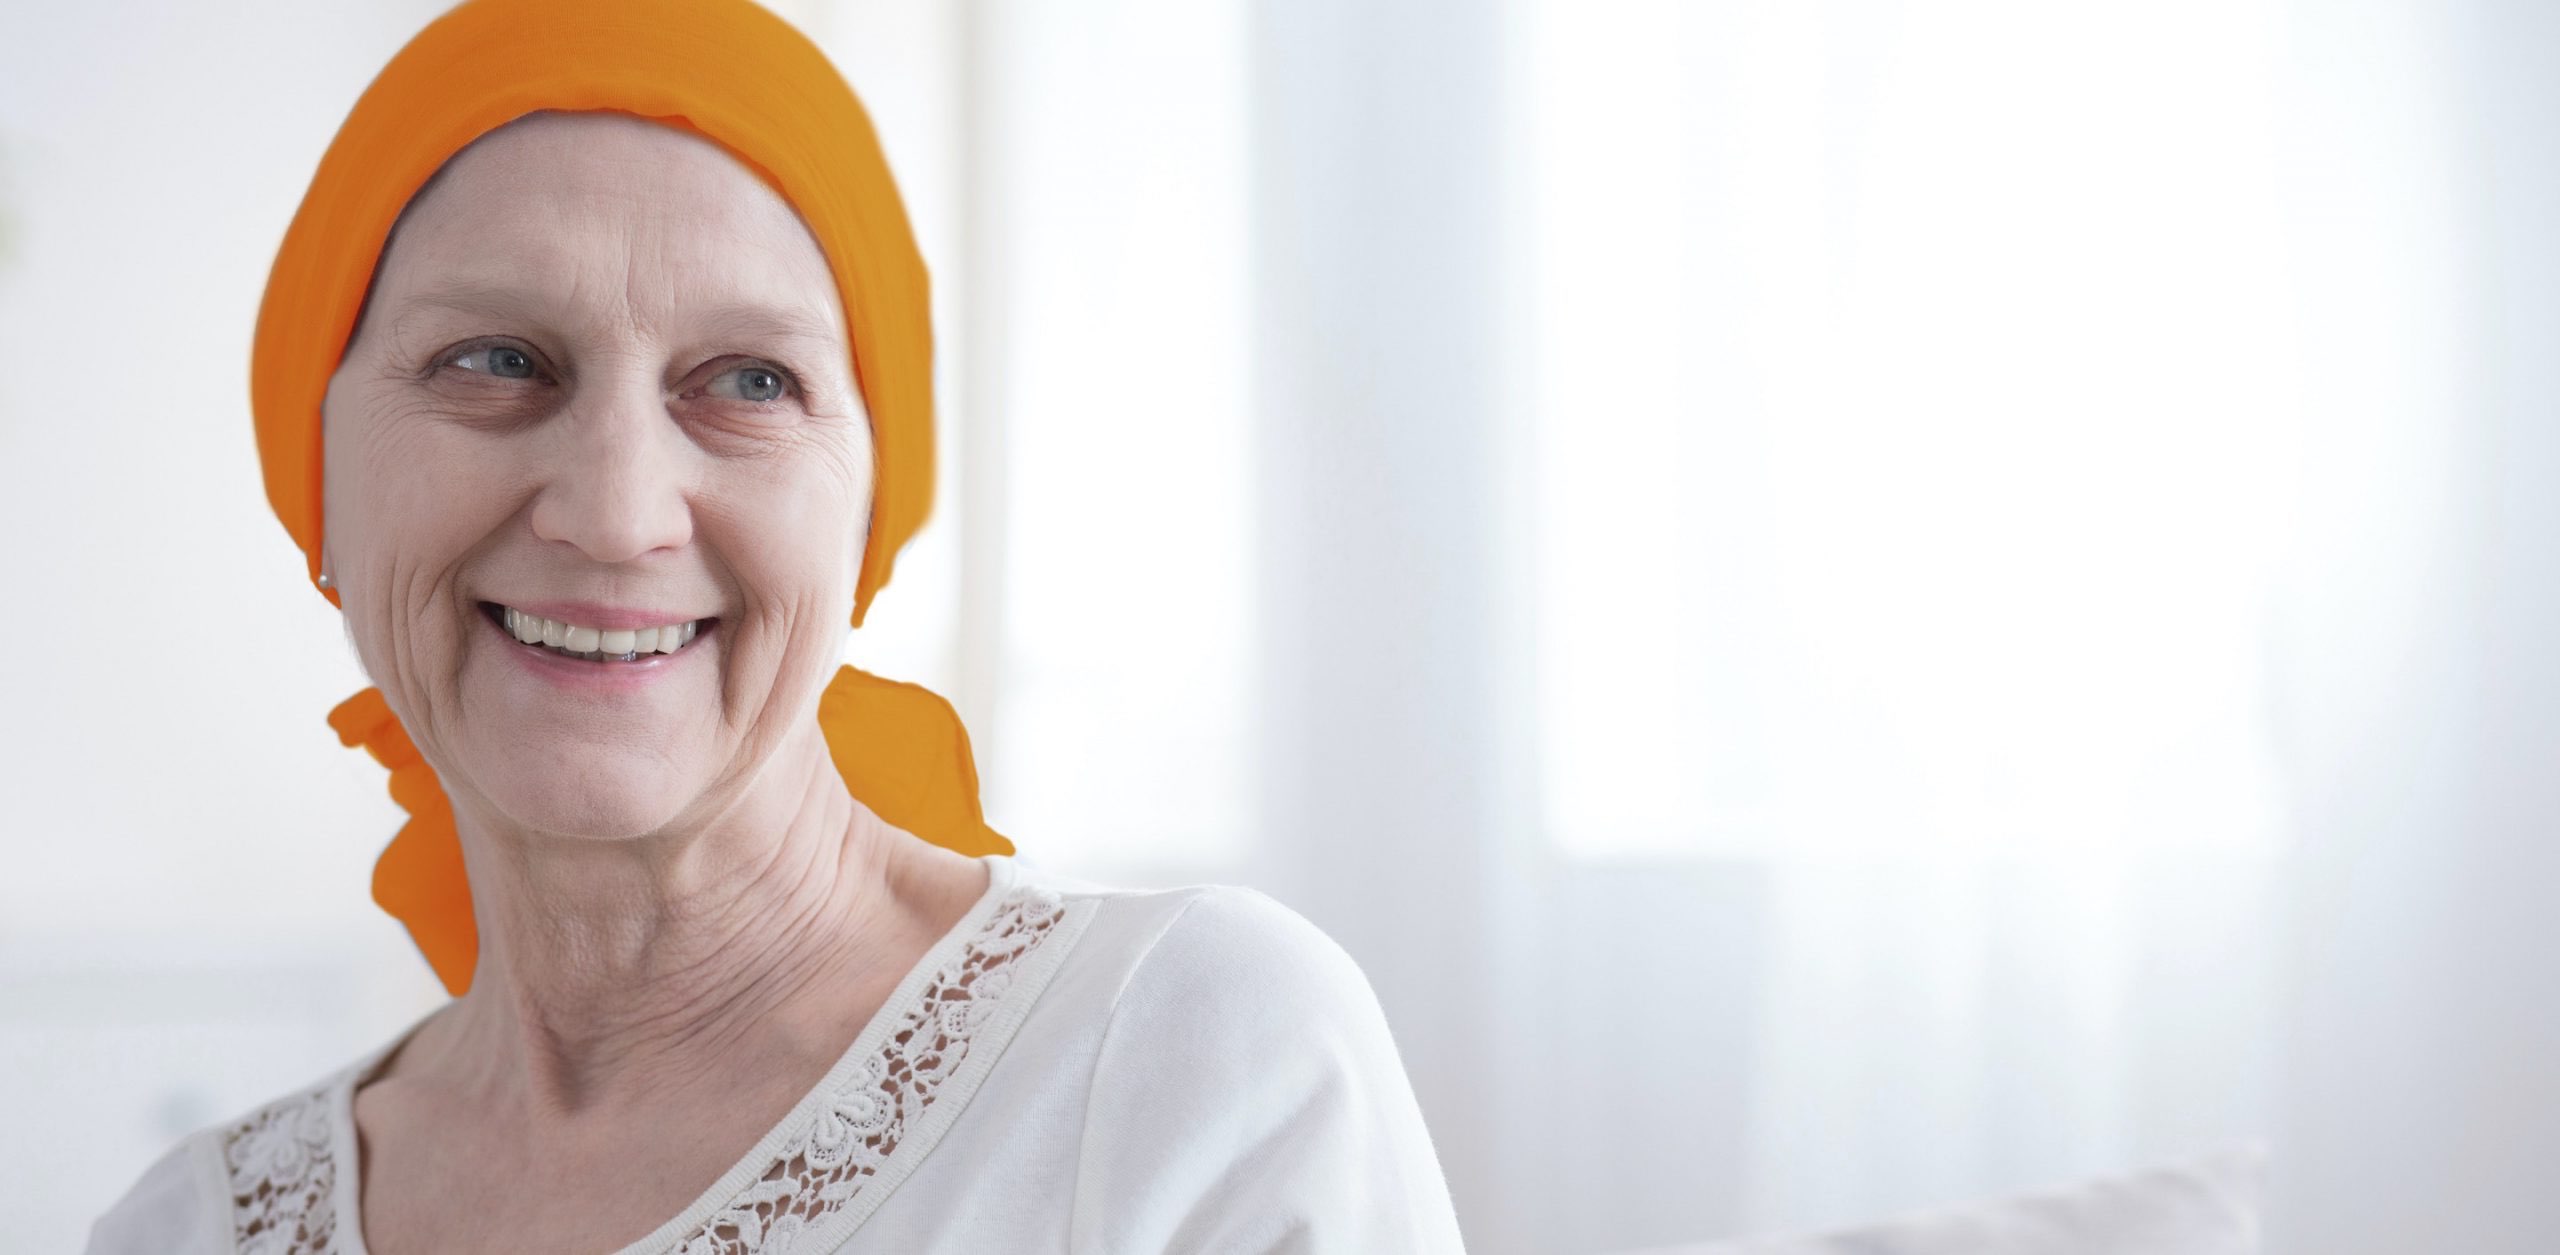 Upper,Body,Portrait,Of,An,Older,Female,Cancer,Patient,Looking